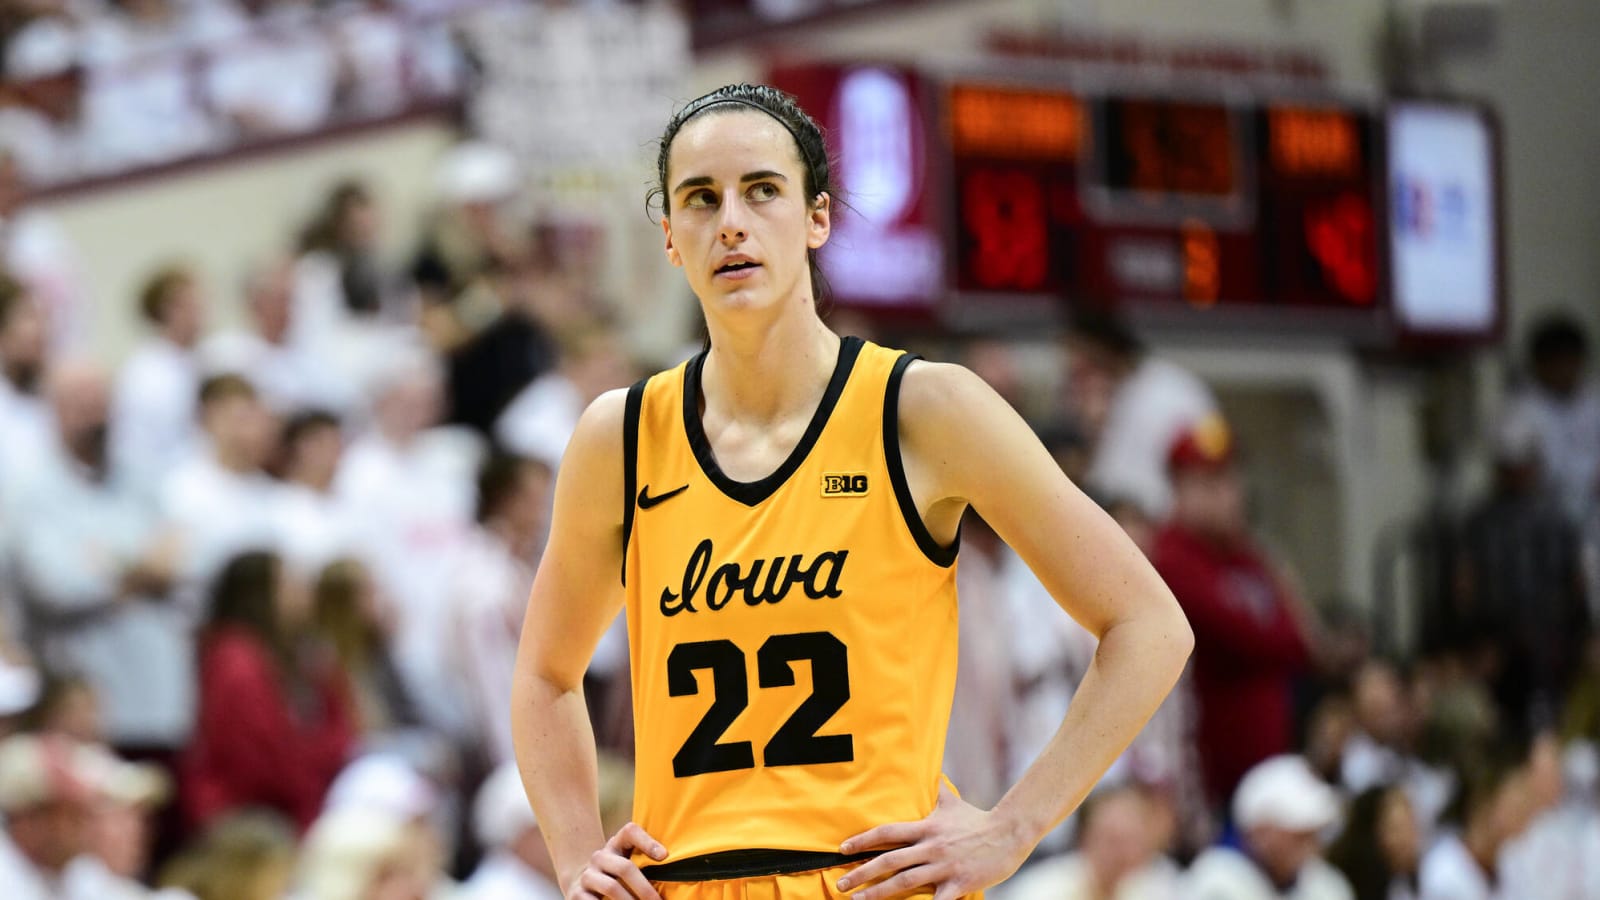 Iowa's Caitlin Clark sets records off the court, too